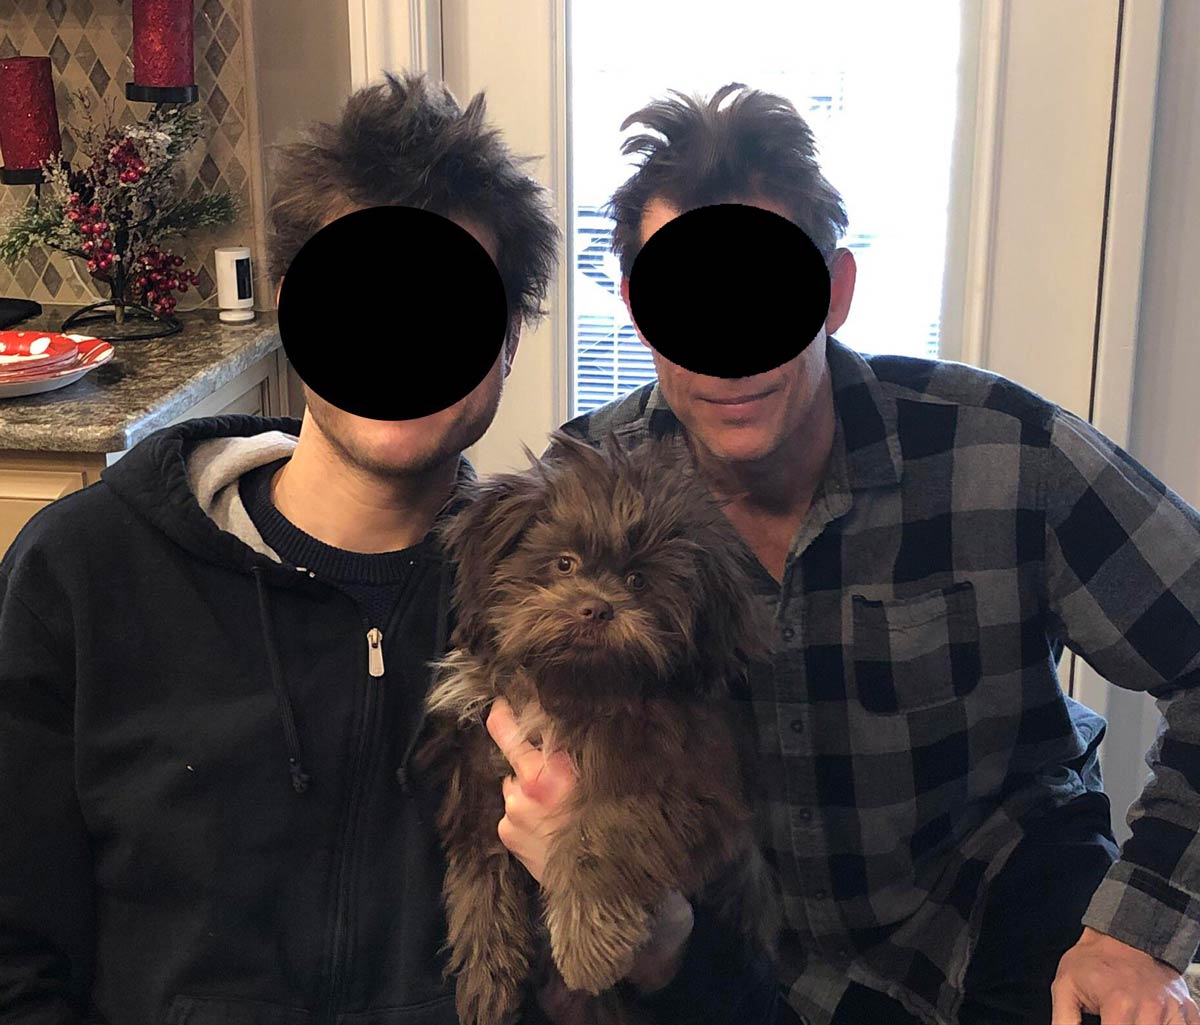 My dad, his dog, and I all share the same hair cut